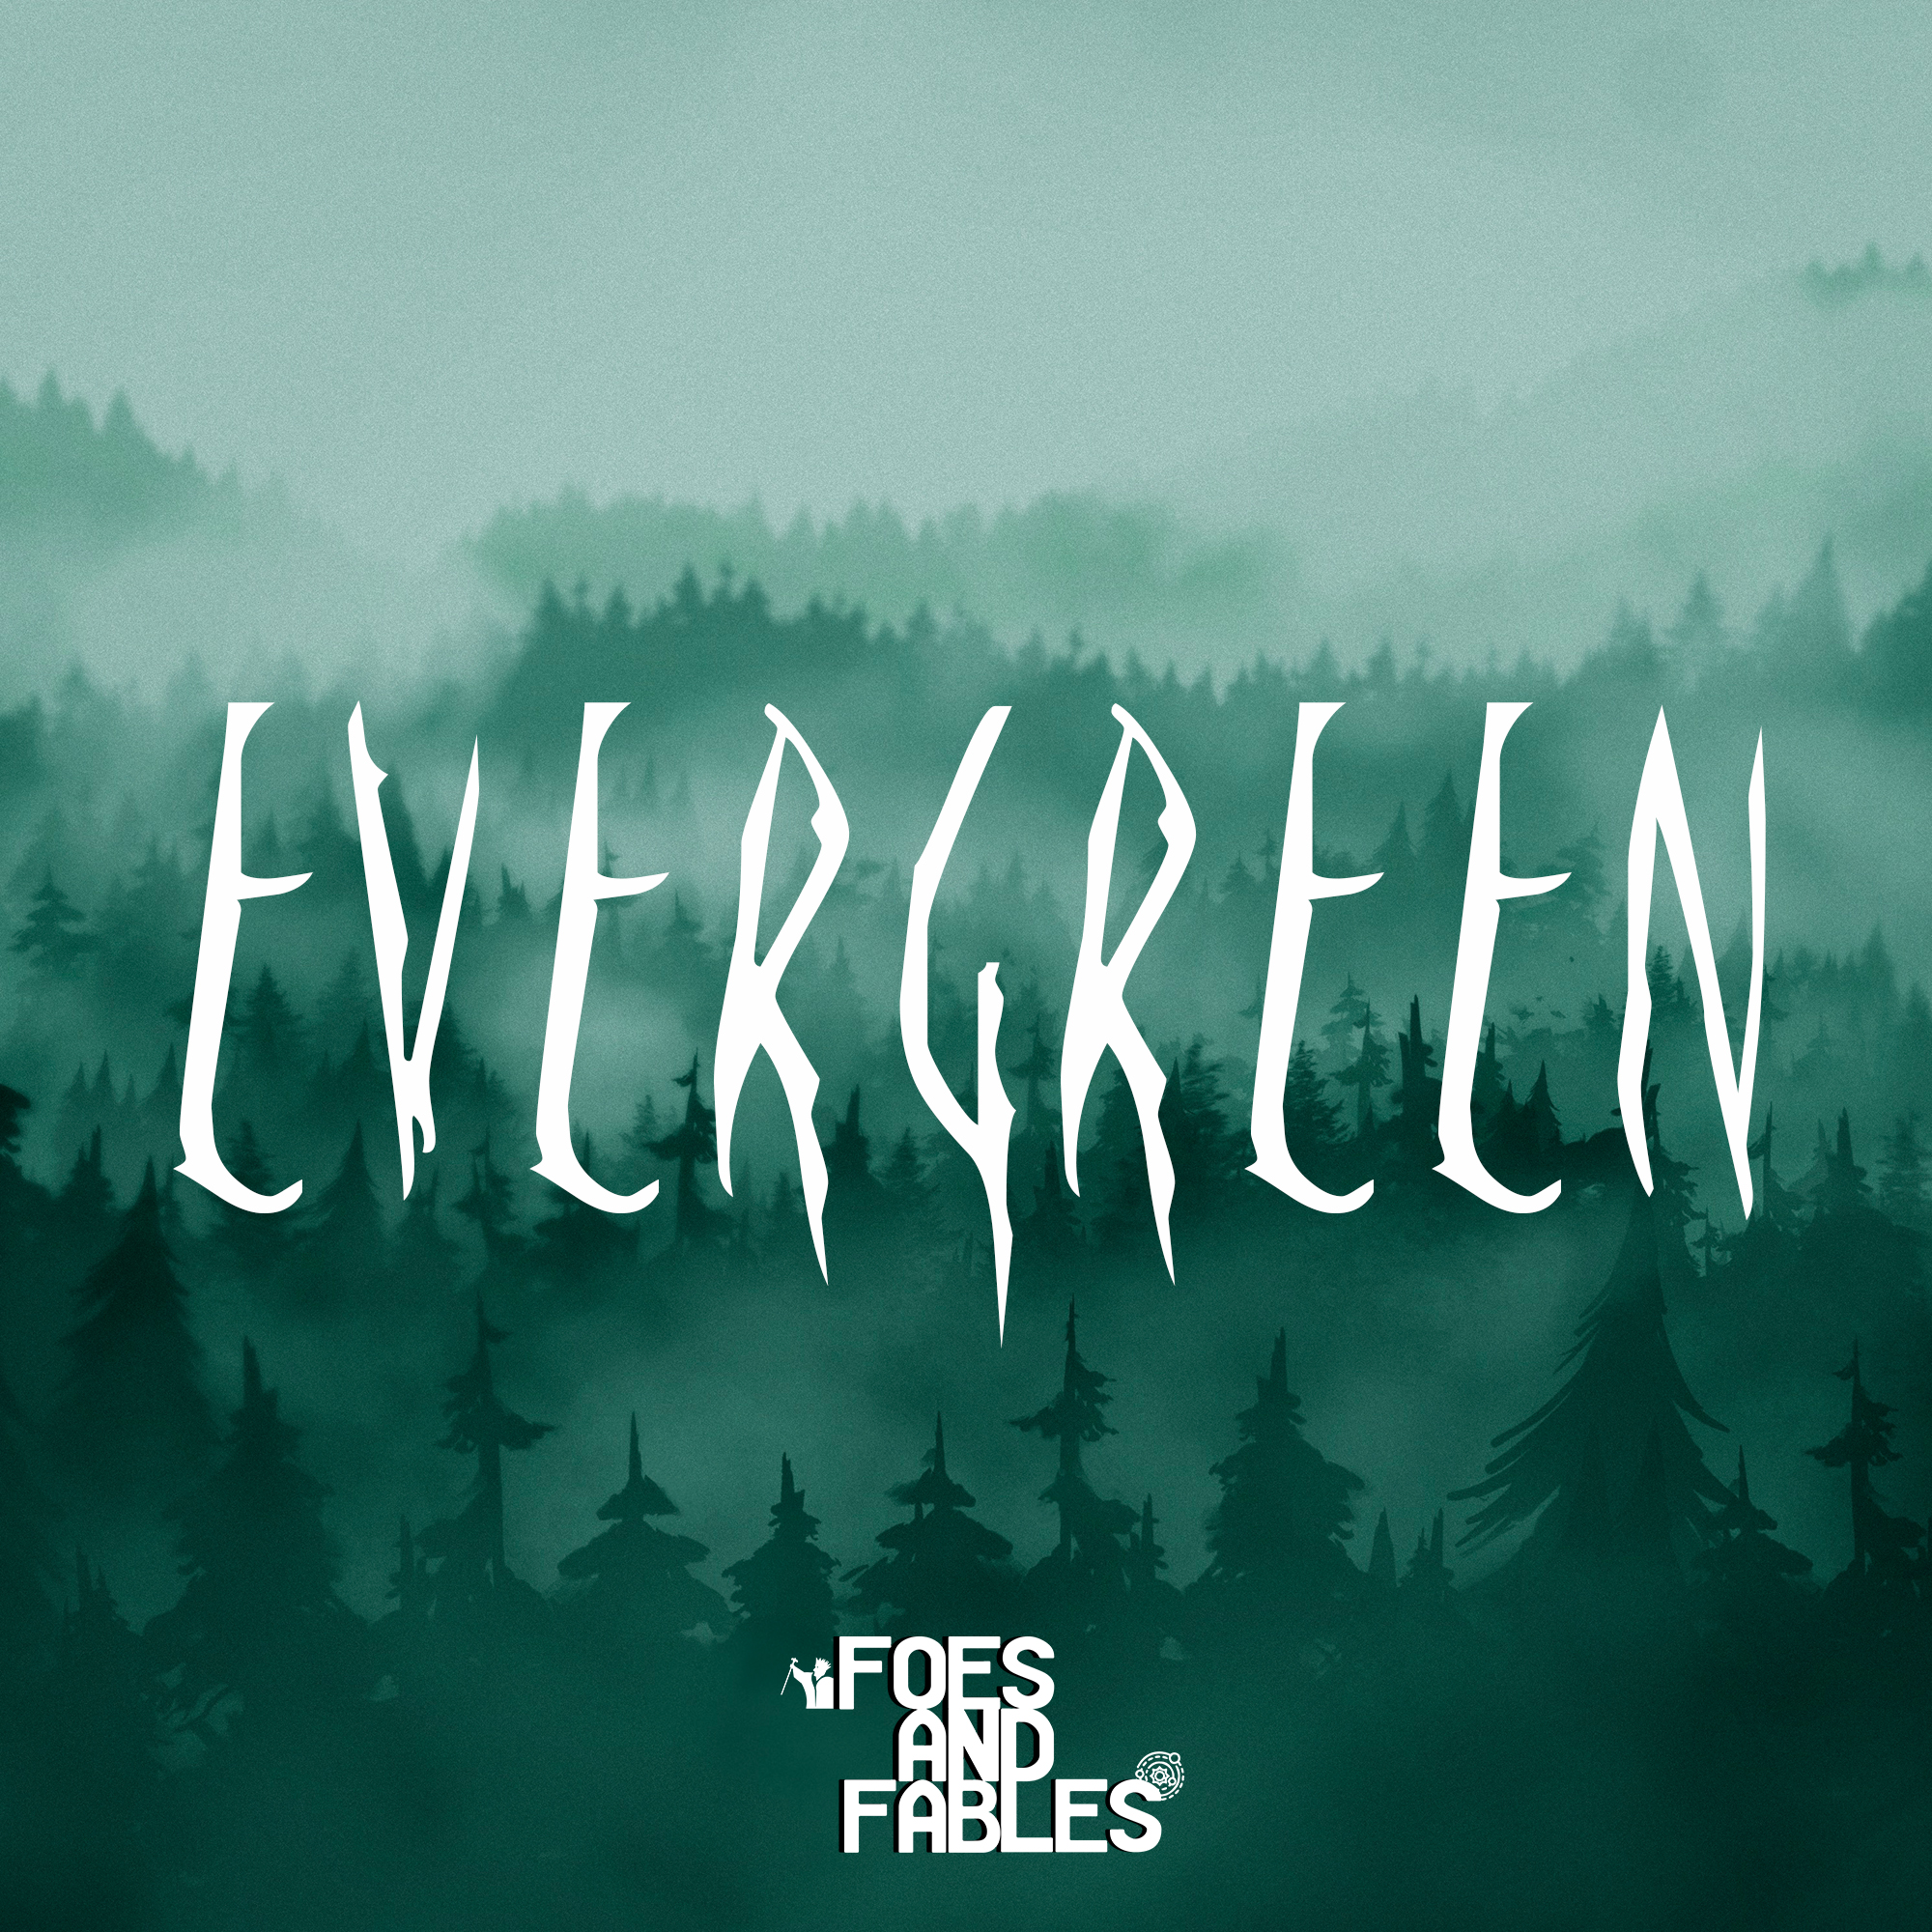 15. The End of a World | Evergreen